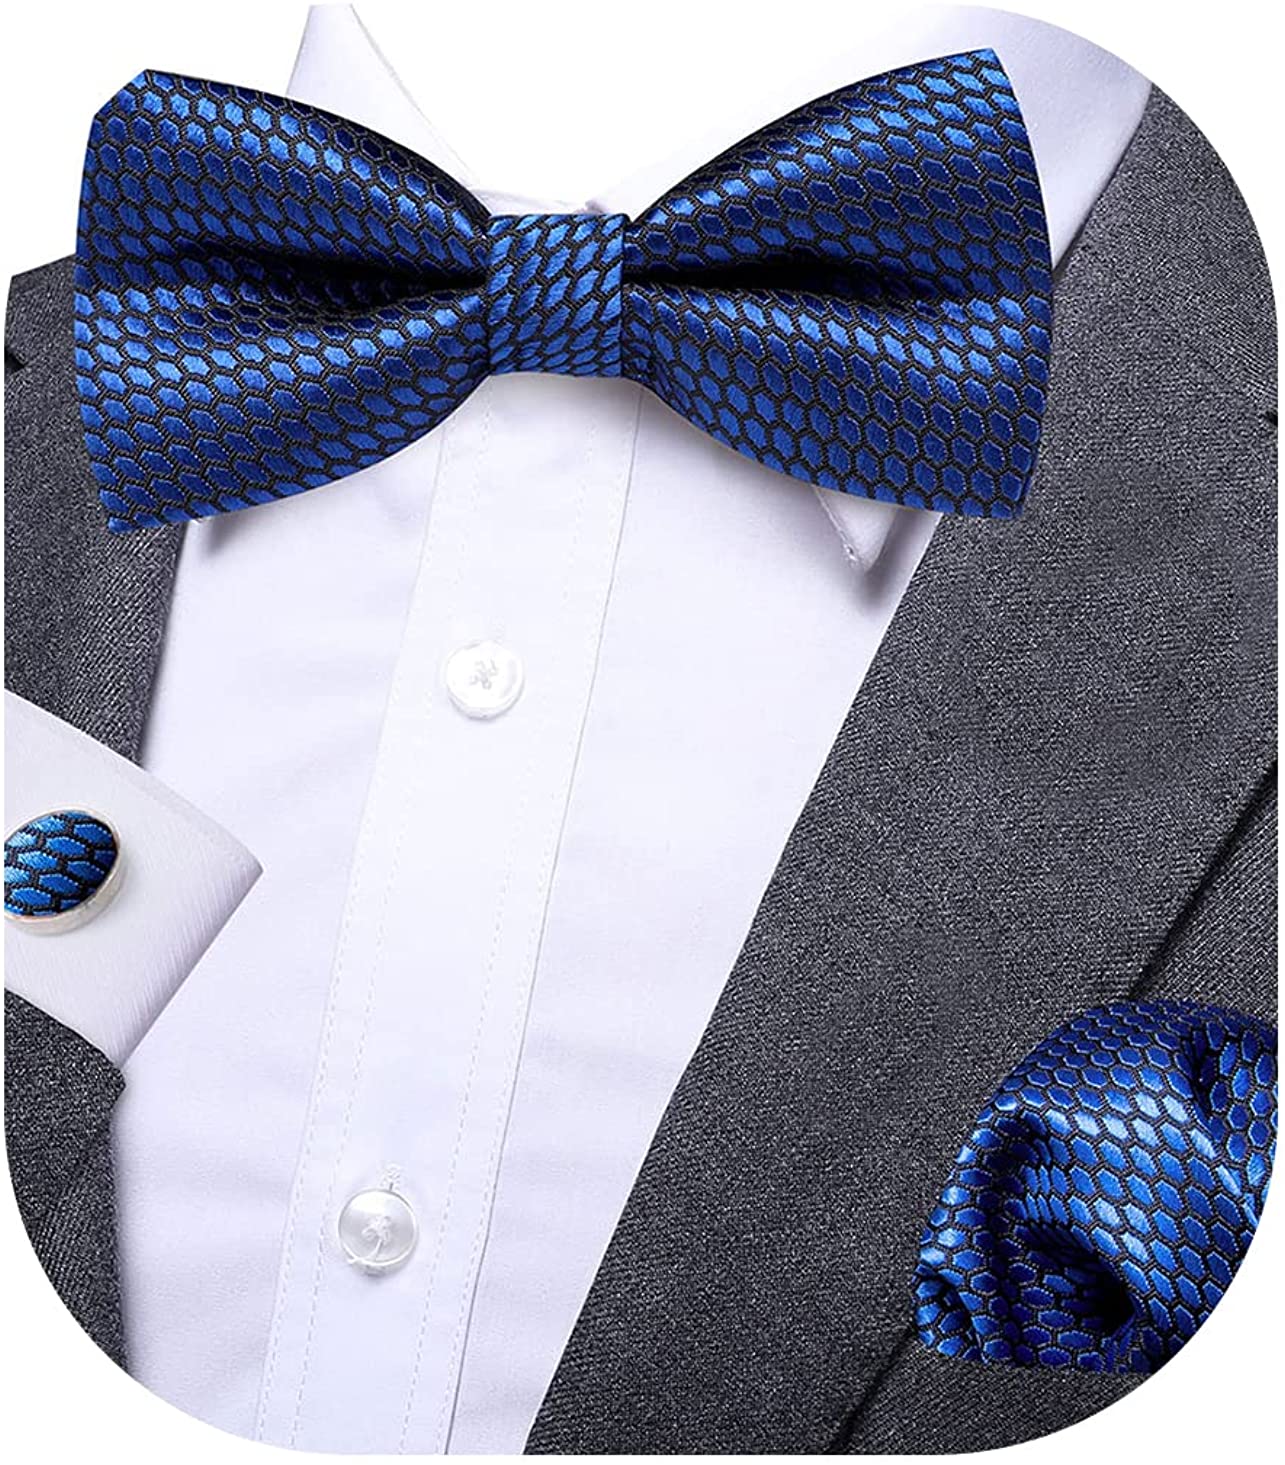 Dubulle Mens Silk Bow Tie and Pocket Square Set for Wedding Tuxedo …